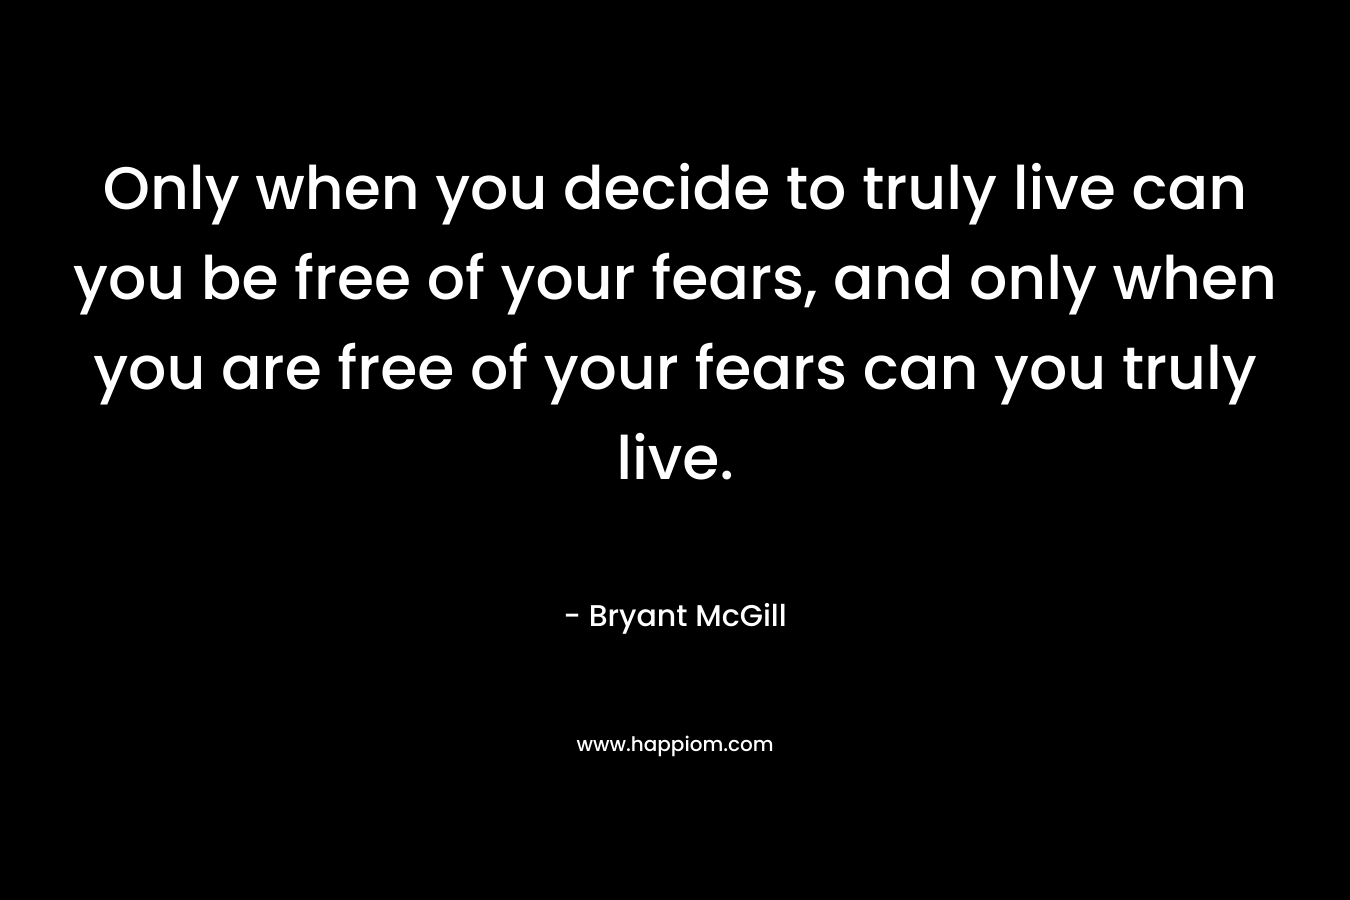 Only when you decide to truly live can you be free of your fears, and only when you are free of your fears can you truly live. – Bryant McGill